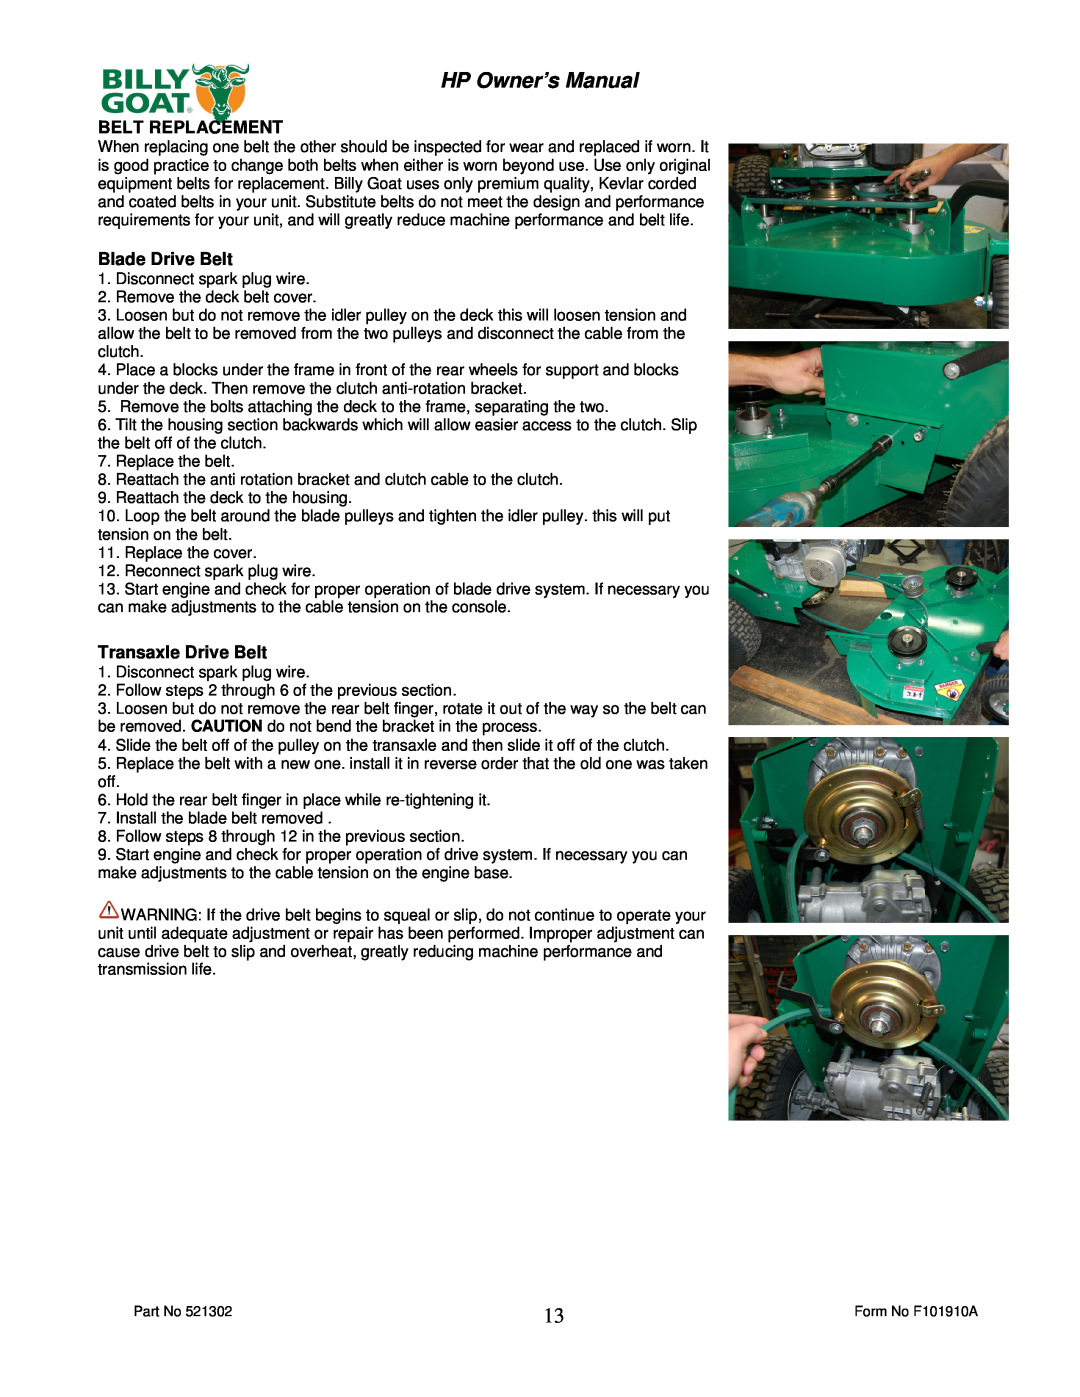 Billy Goat HP3400 owner manual HP Owner’s Manual, Belt Replacement, Blade Drive Belt, Transaxle Drive Belt 